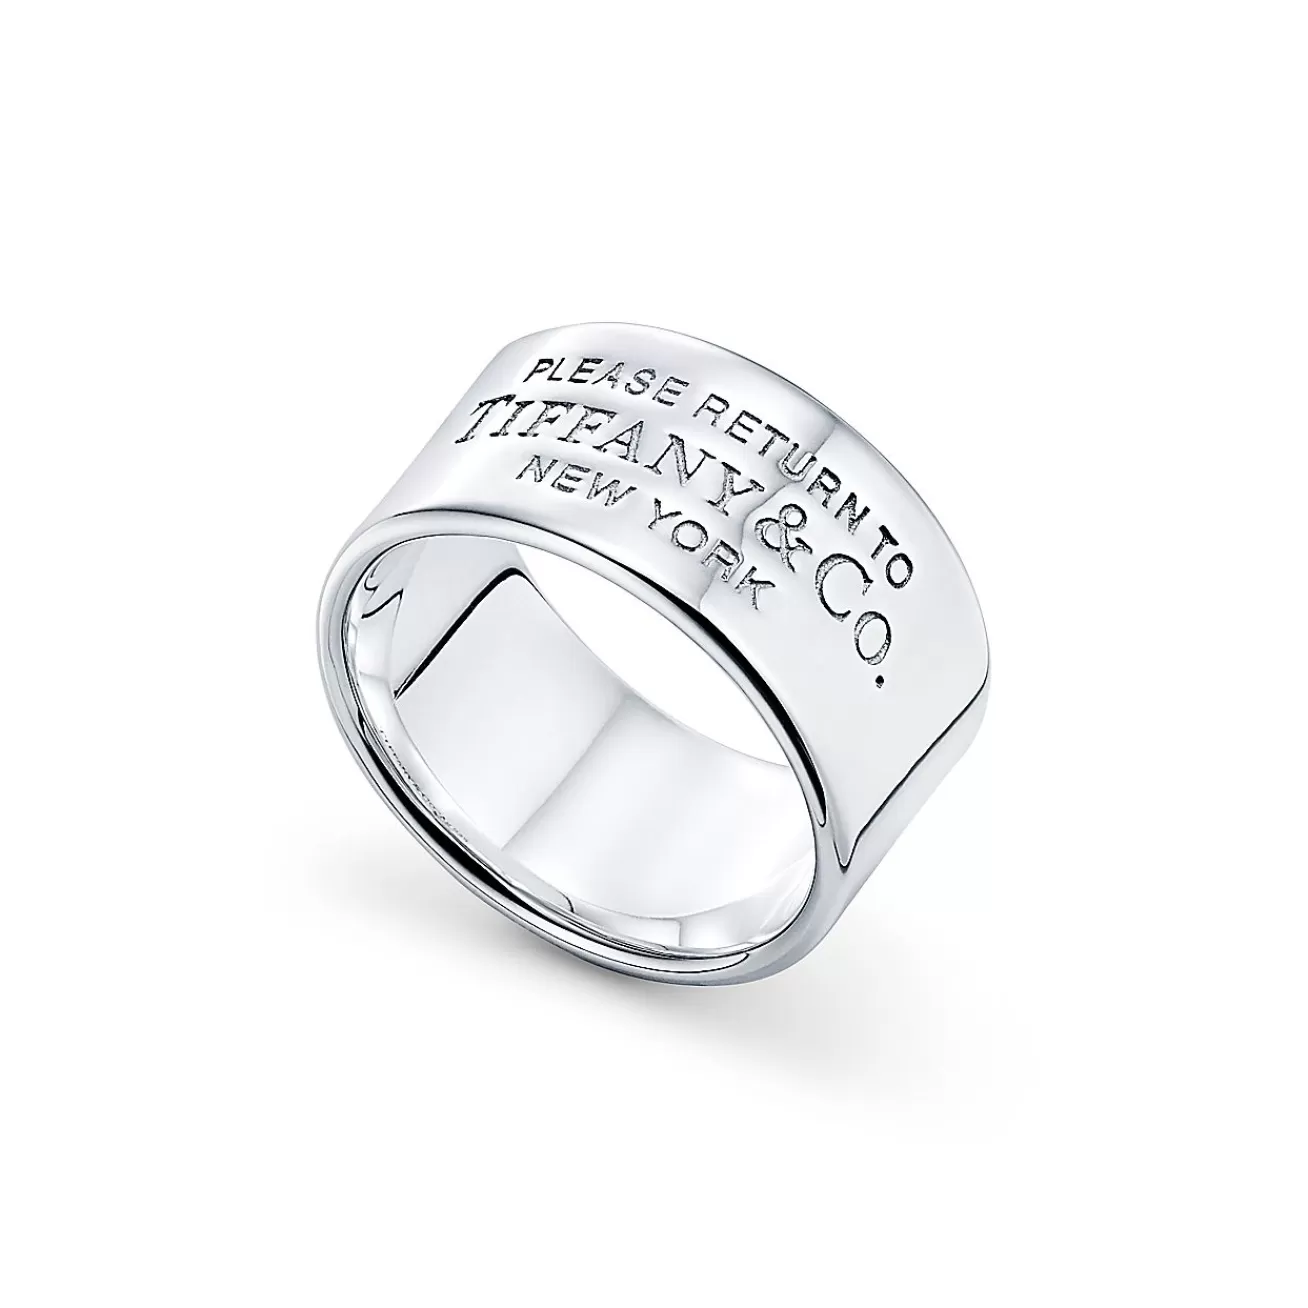 Tiffany & Co. Return to Tiffany® wide ring in sterling silver, 10 mm wide. | ^ Rings | Bold Silver Jewelry